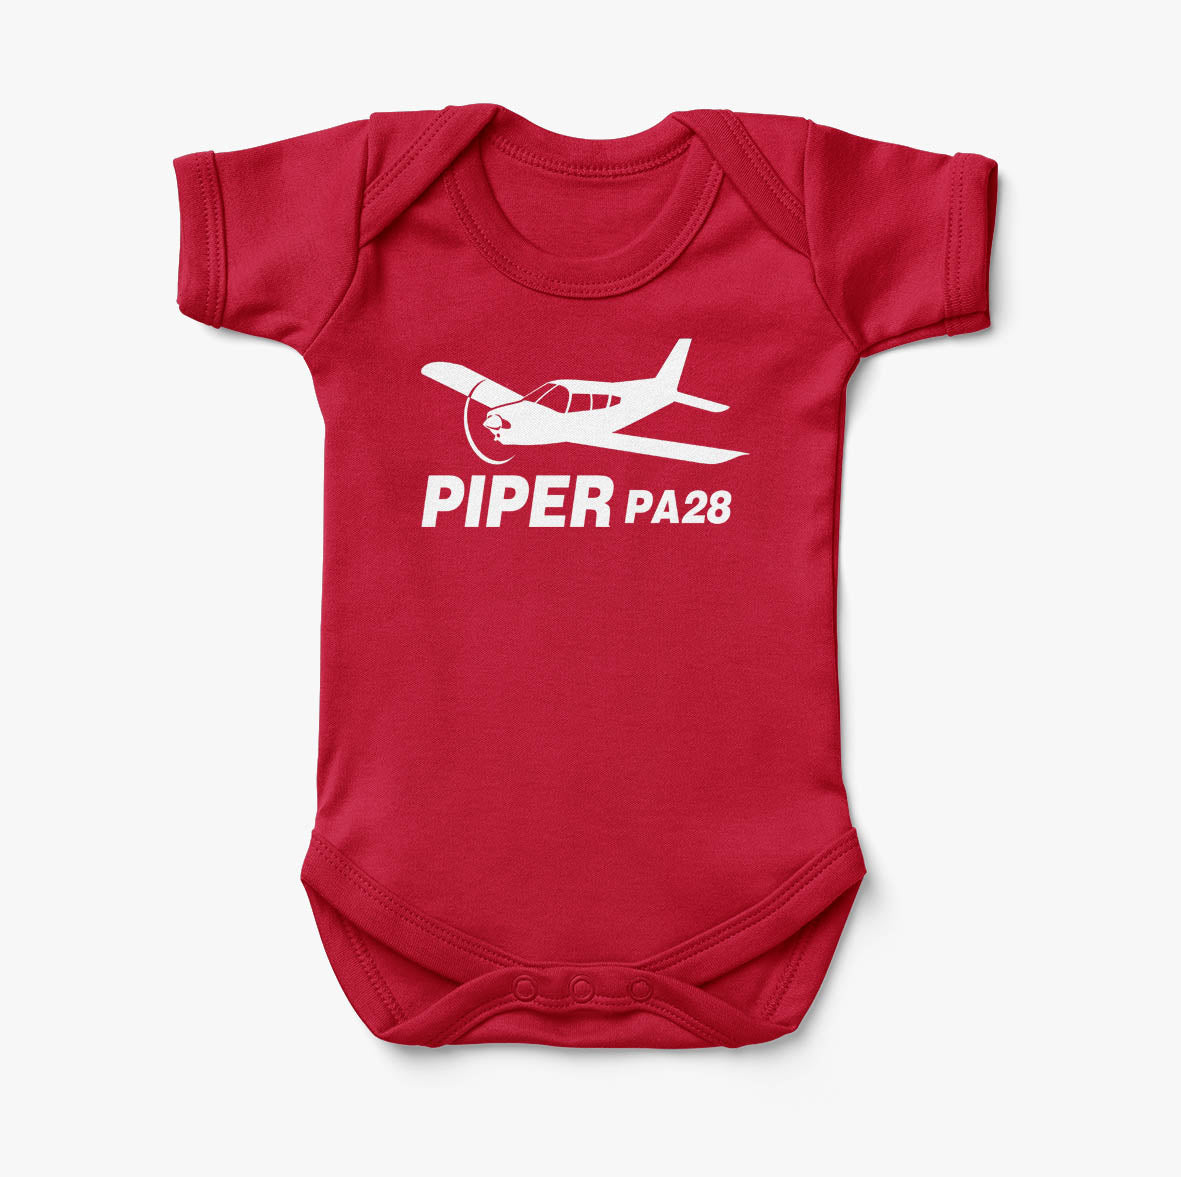 The Piper PA28 Designed Baby Bodysuits